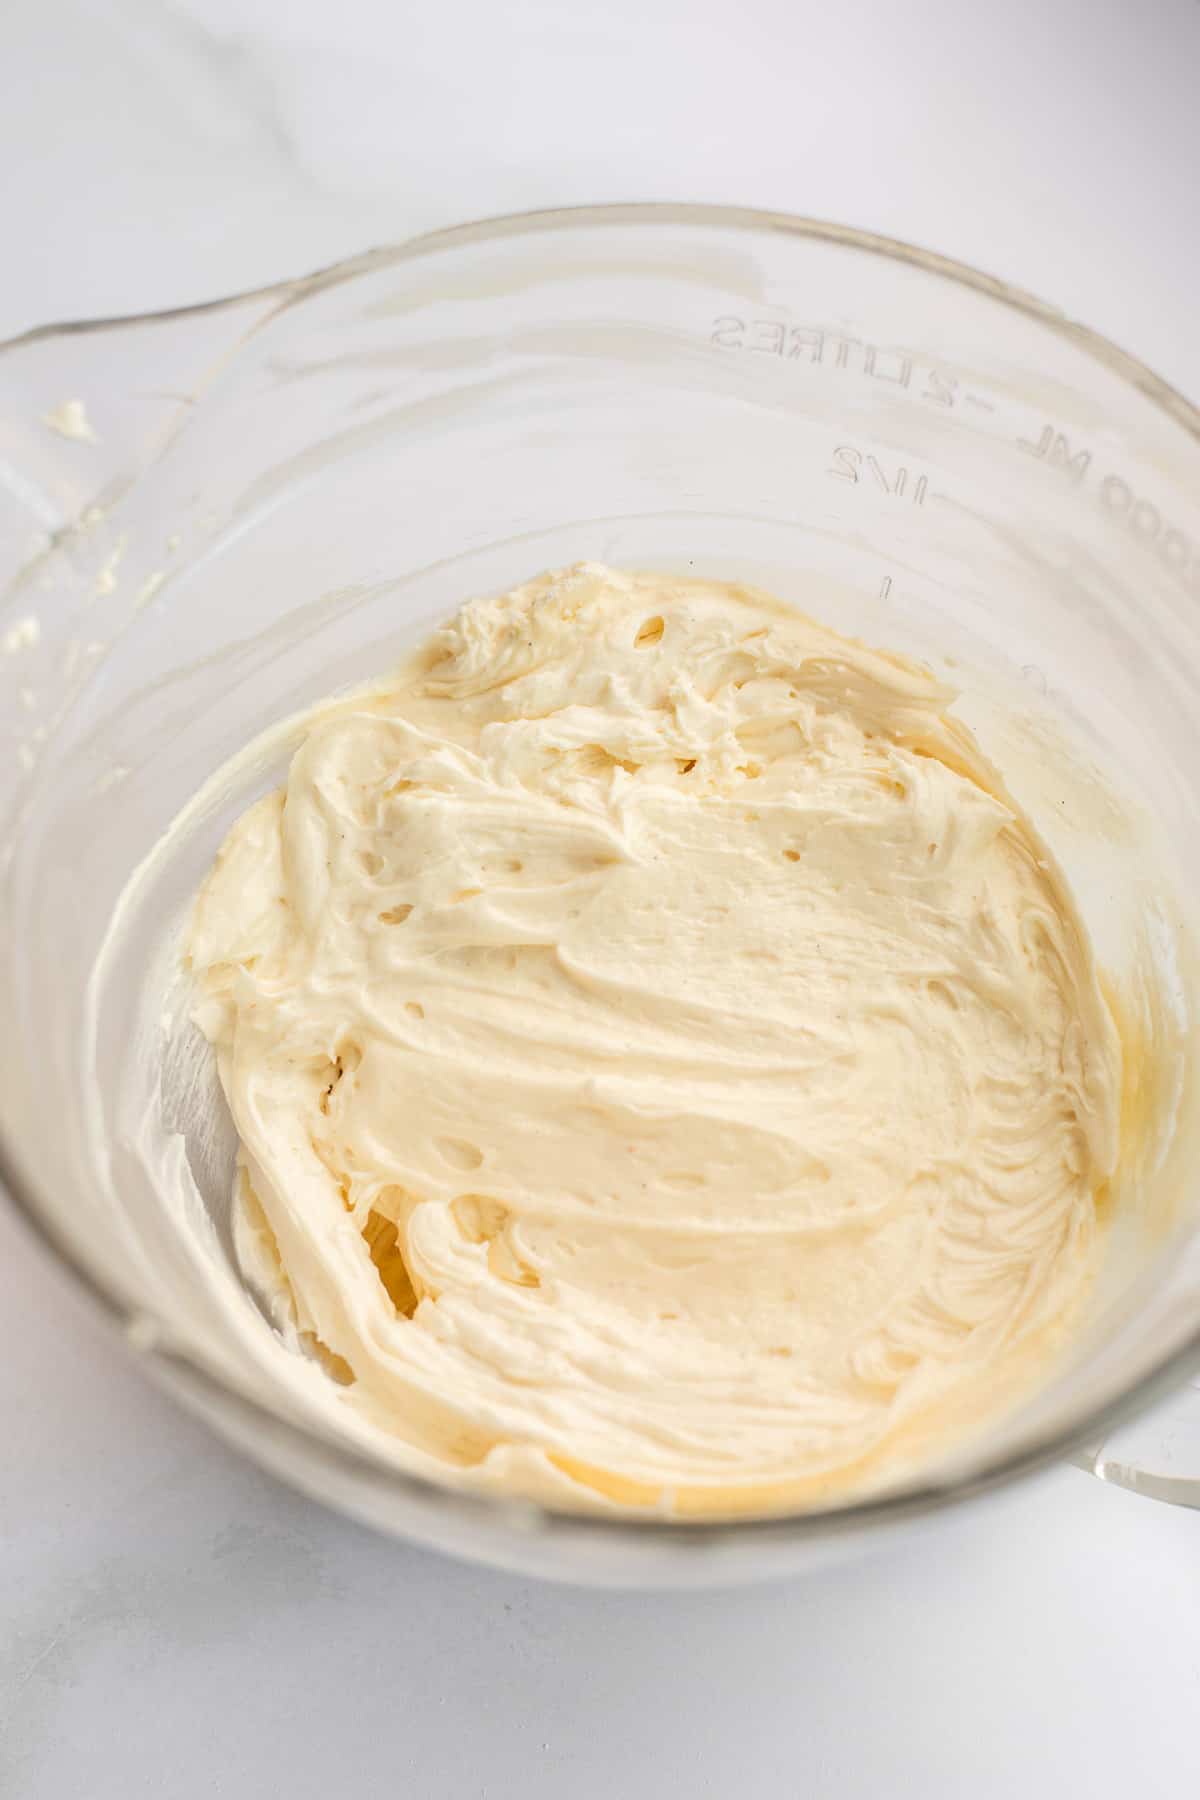 dairy free buttercream in a glass bowl.